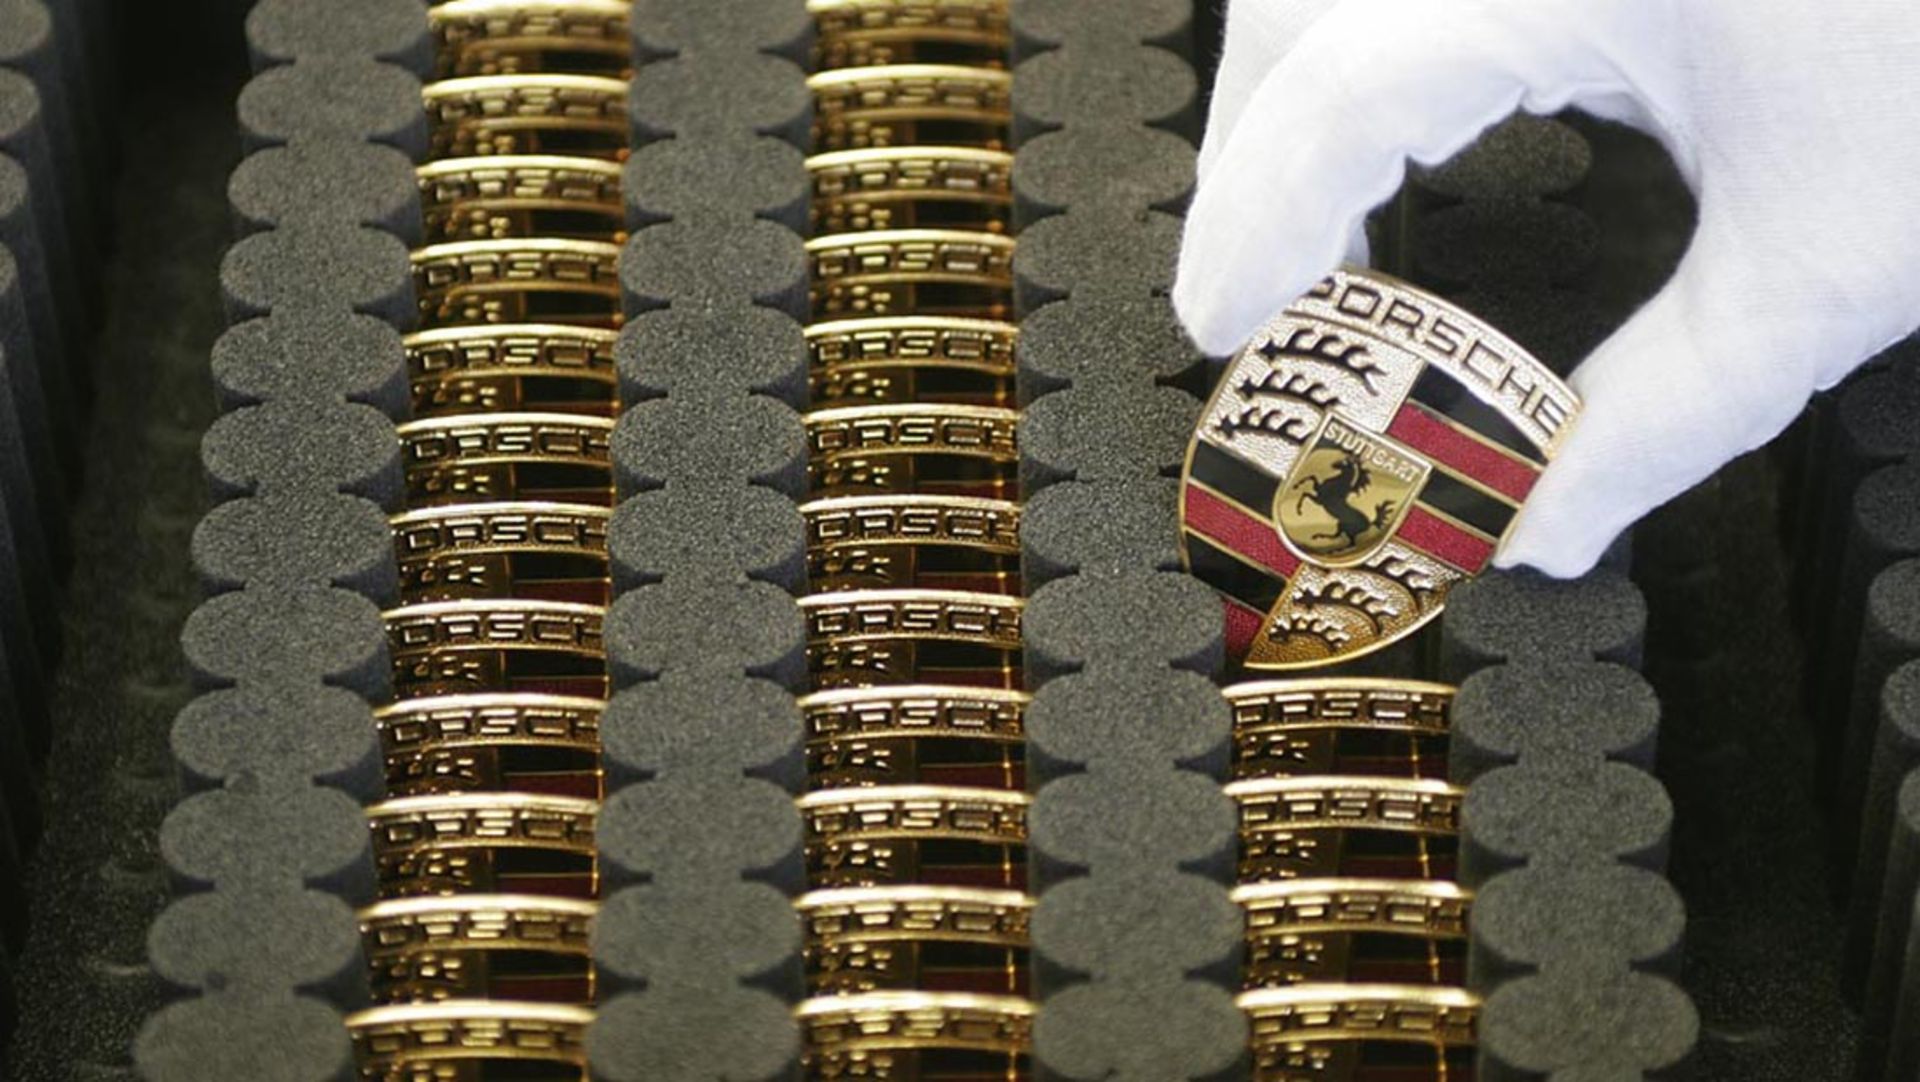 1673868396 The Porsche badge comes from a business lunch